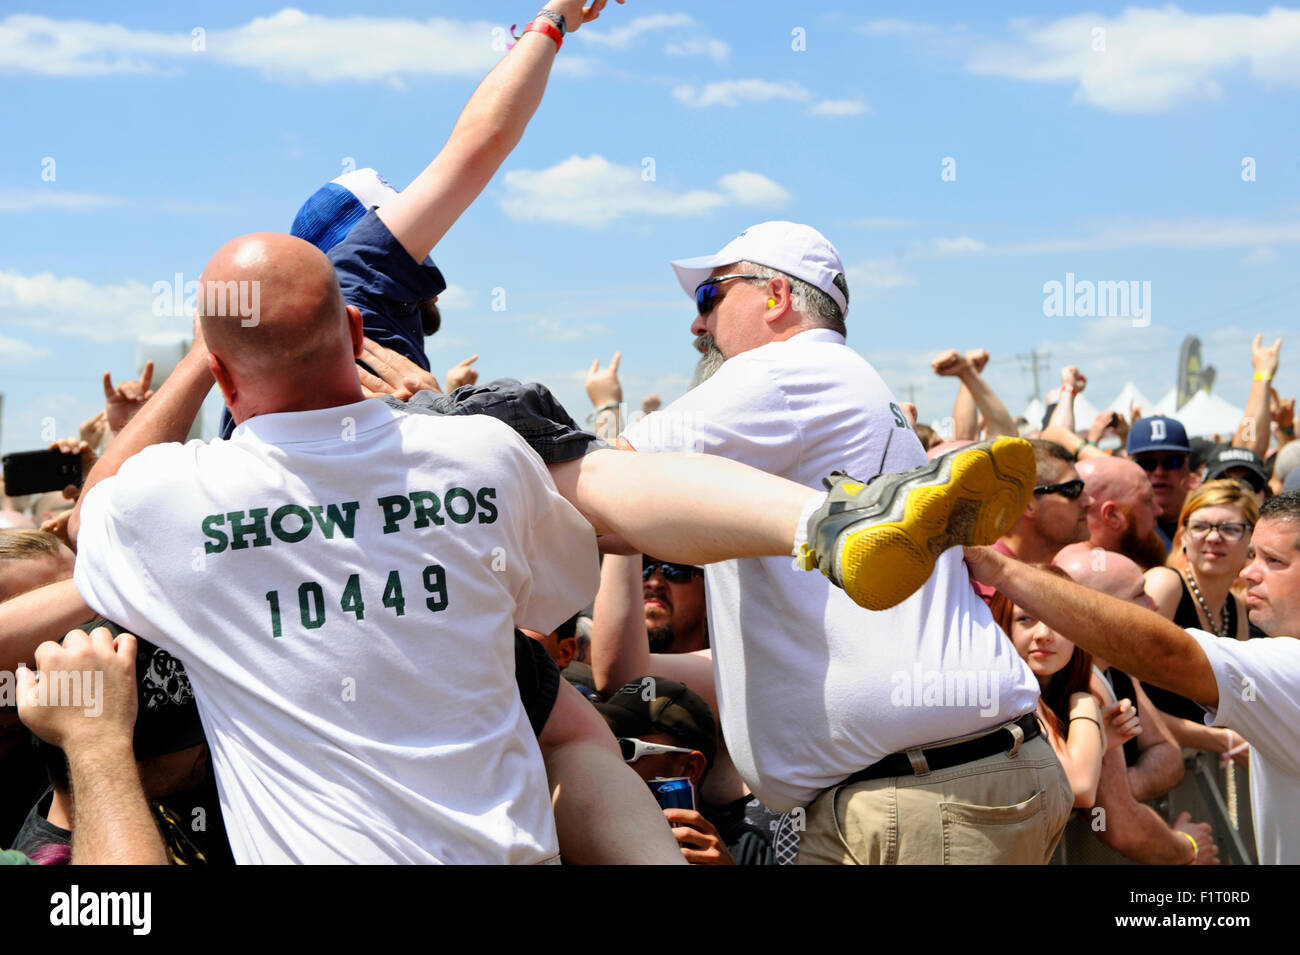 Crowd control staff catches a crowd surfer at the Heavy Metal music festival the 2015 Monster Energy Carolina Rebellion Stock Photo